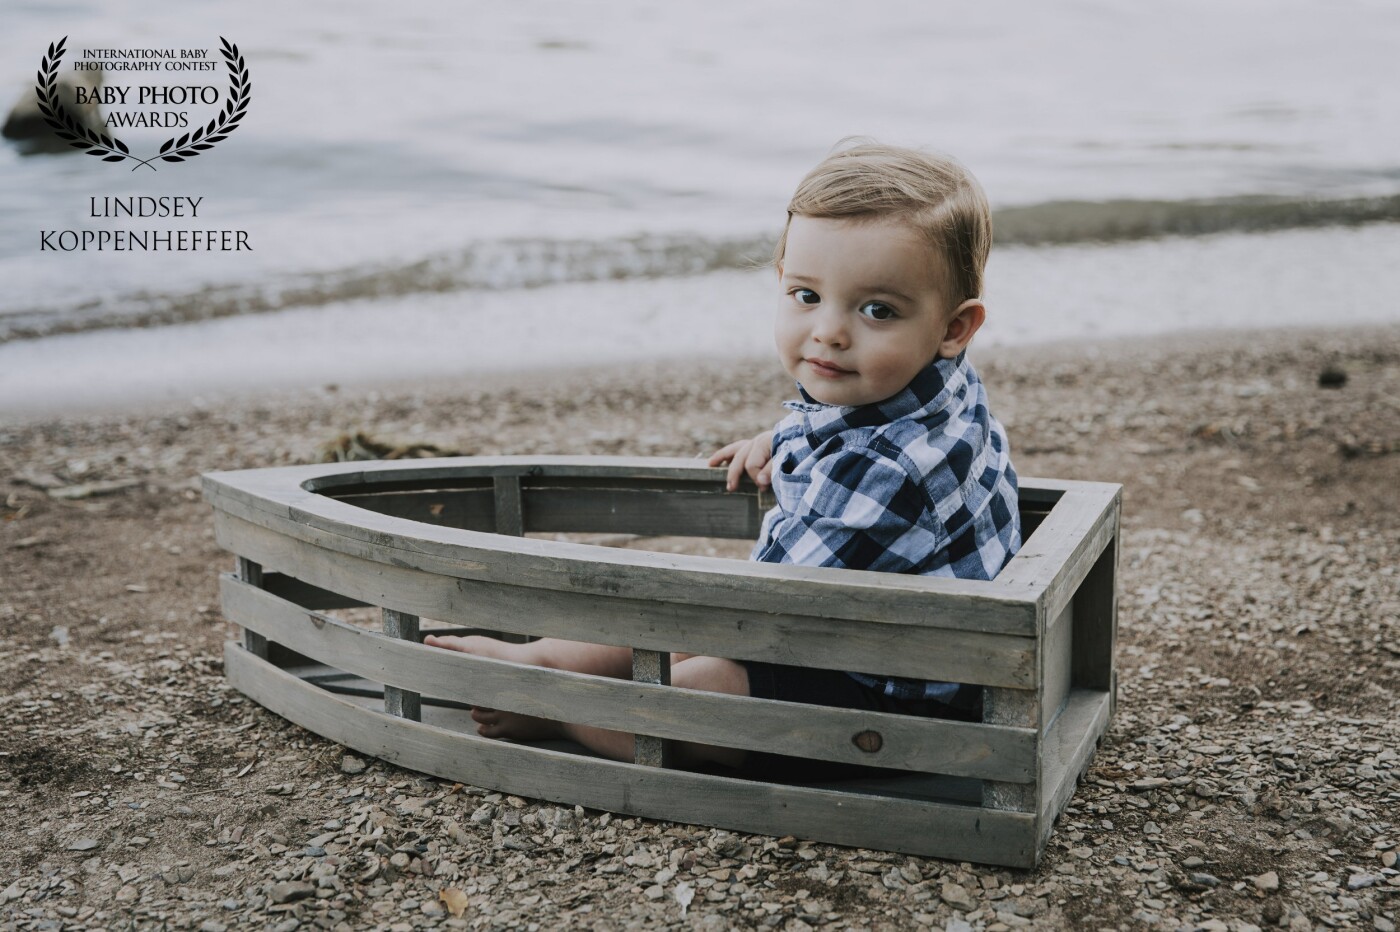 Meet Owen! In celebration of this handsome guy's first birthday we travelled to Blue Marsh Lake; Pennsylvania's own little beach nestled in Berks County. He was so incredibly sweet and happy making him an absolute joy to capture. This shot was one of the first taken during our session. He was still warming up to the camera and checking things out when I caught this adorable little expression. Look out ladies!